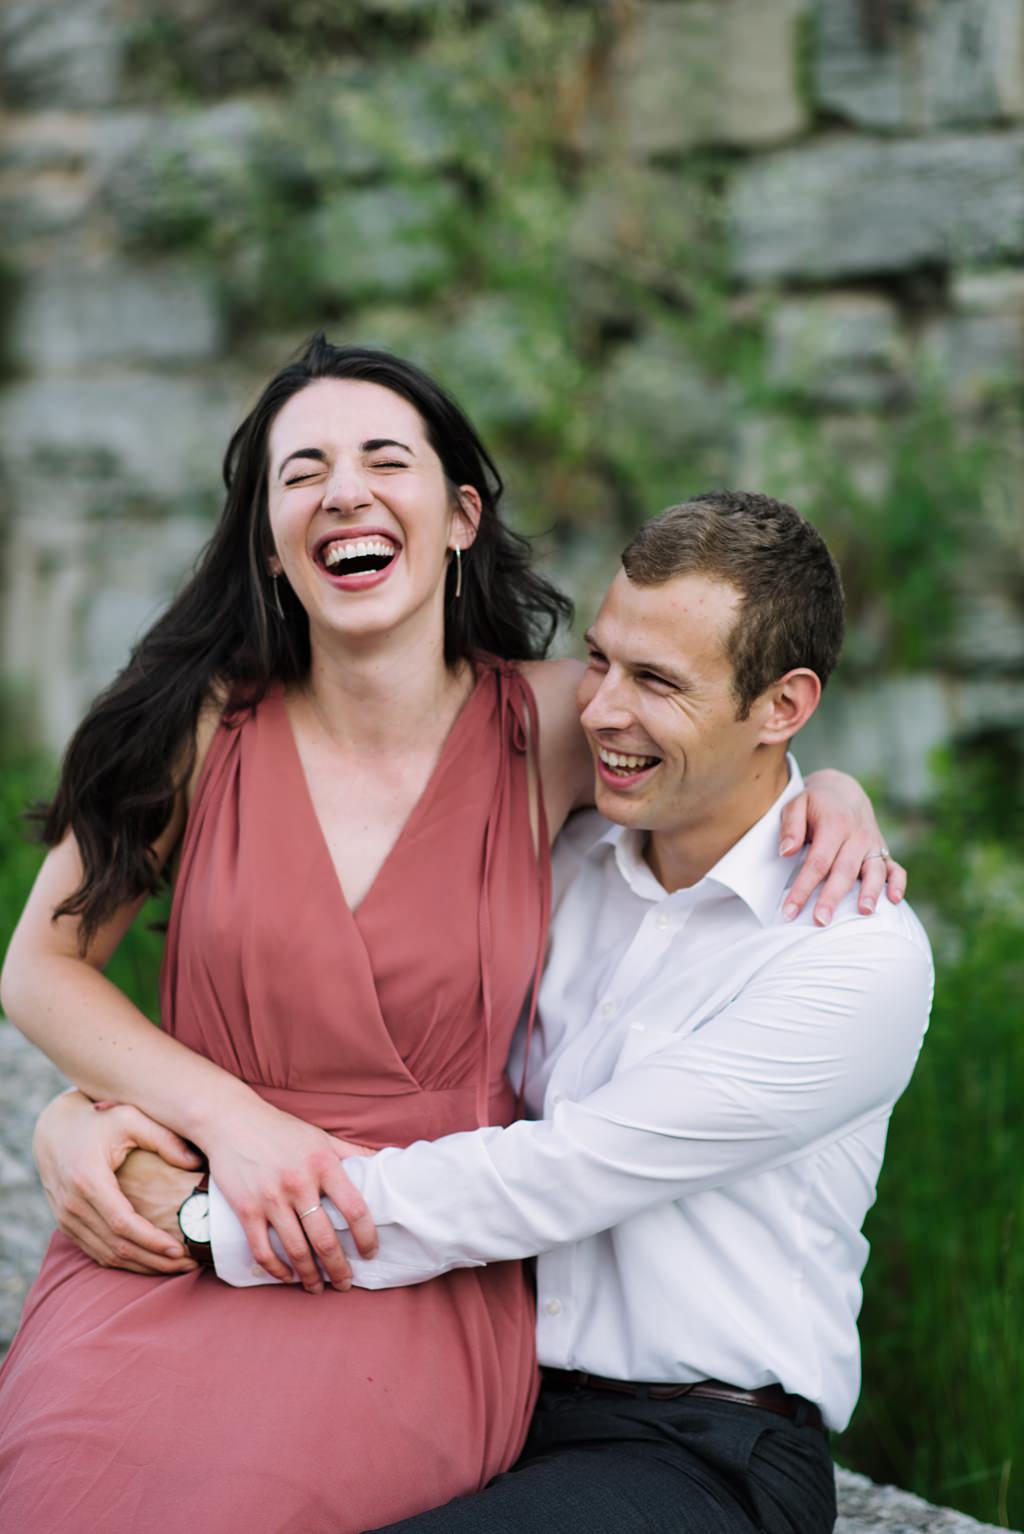 couple laughing in front of stone wall with greenery